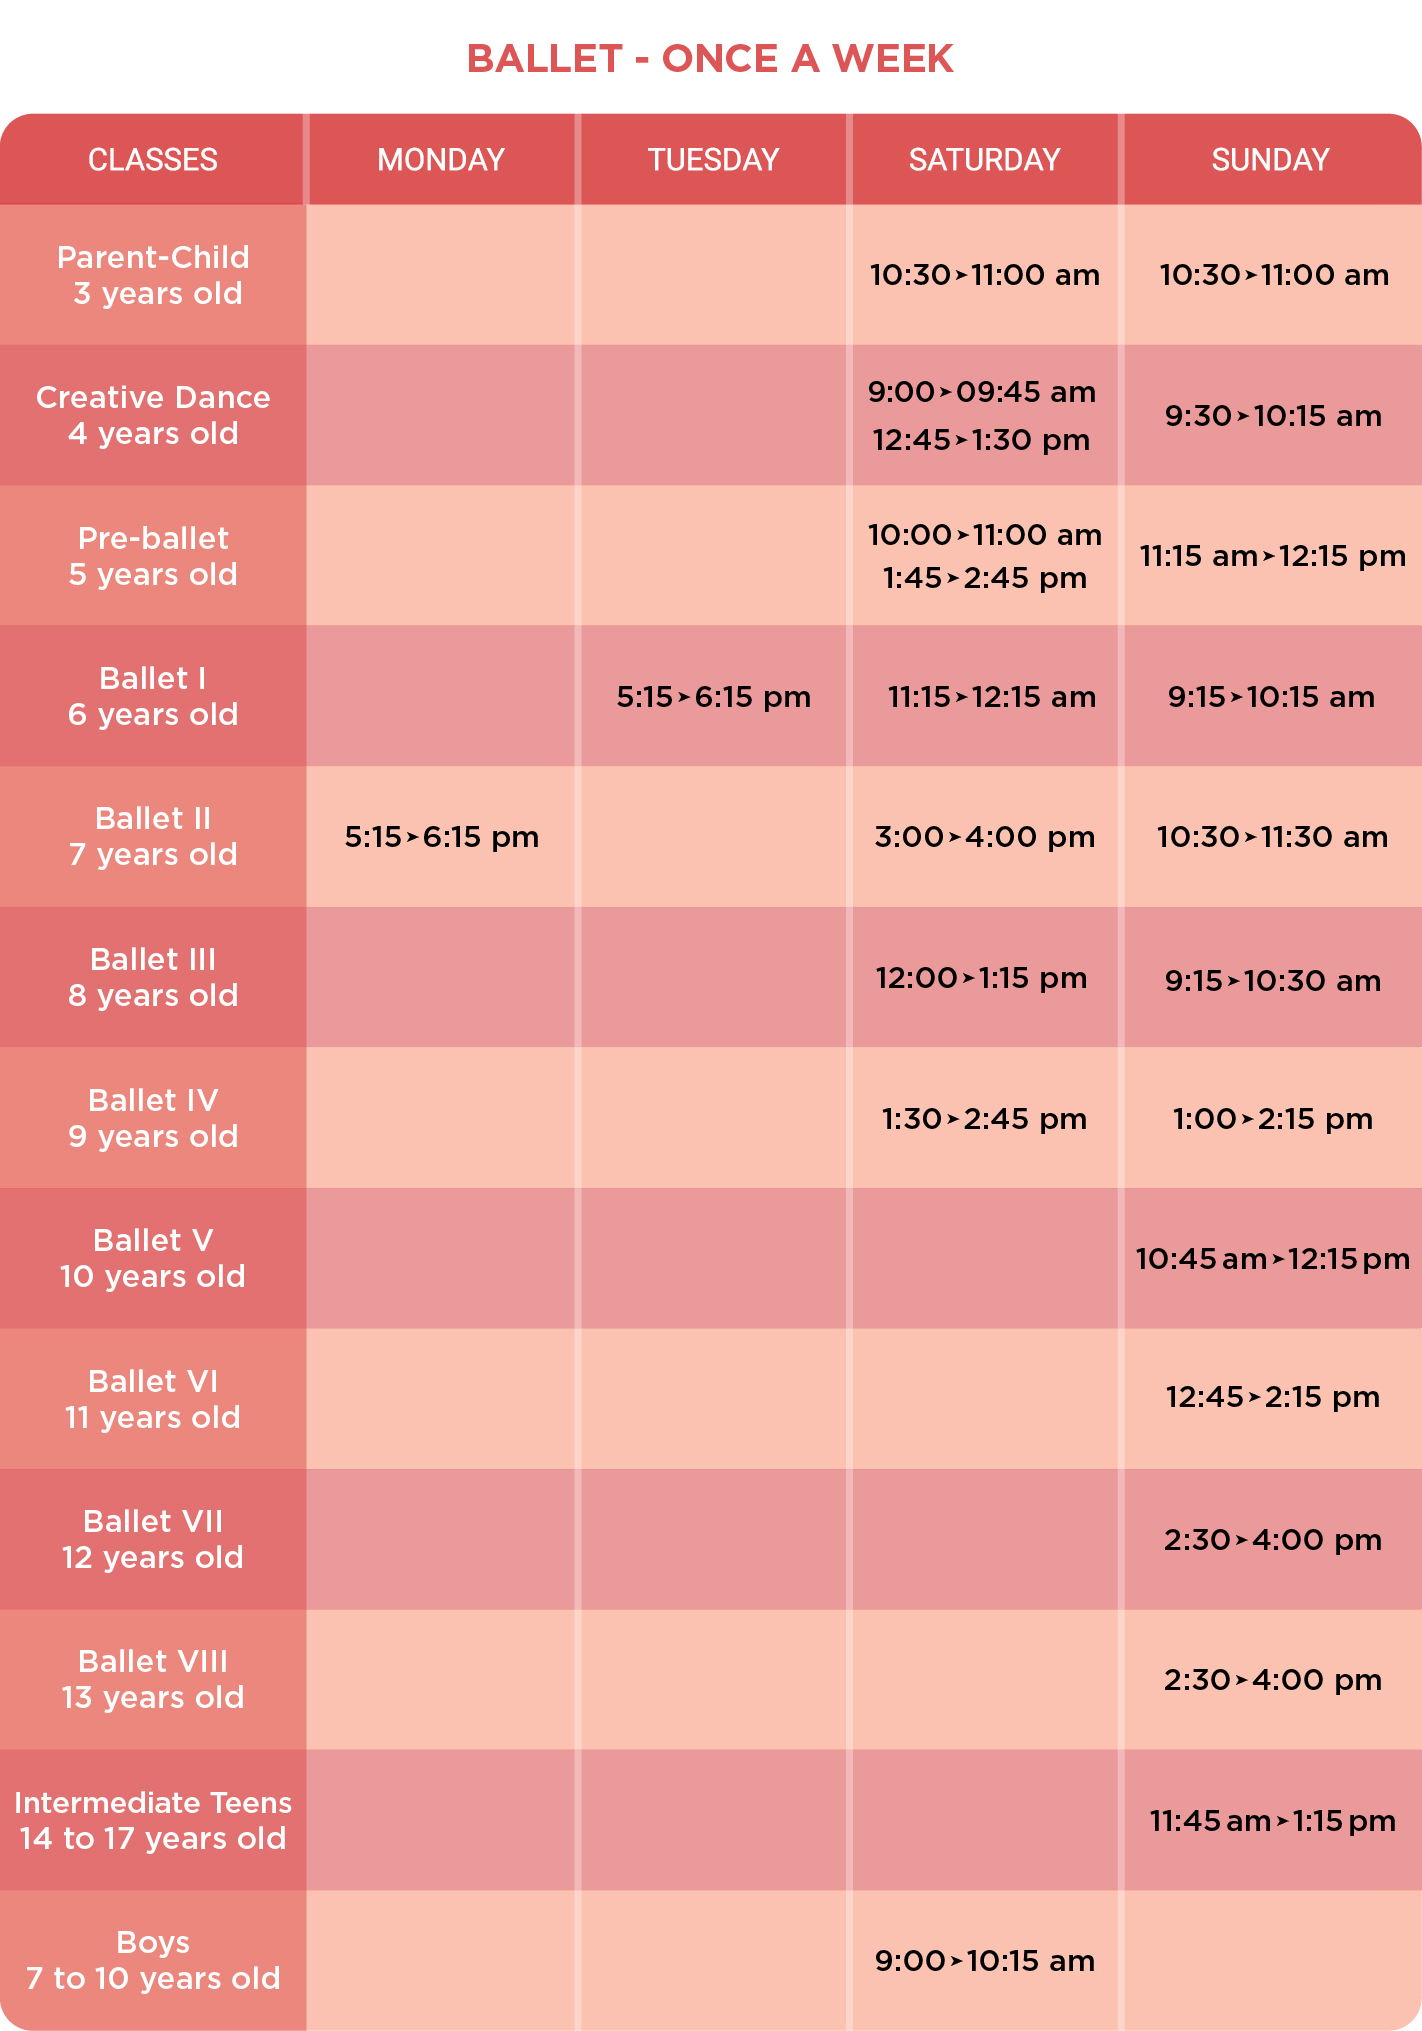 Children classes - Schedule - Once a week